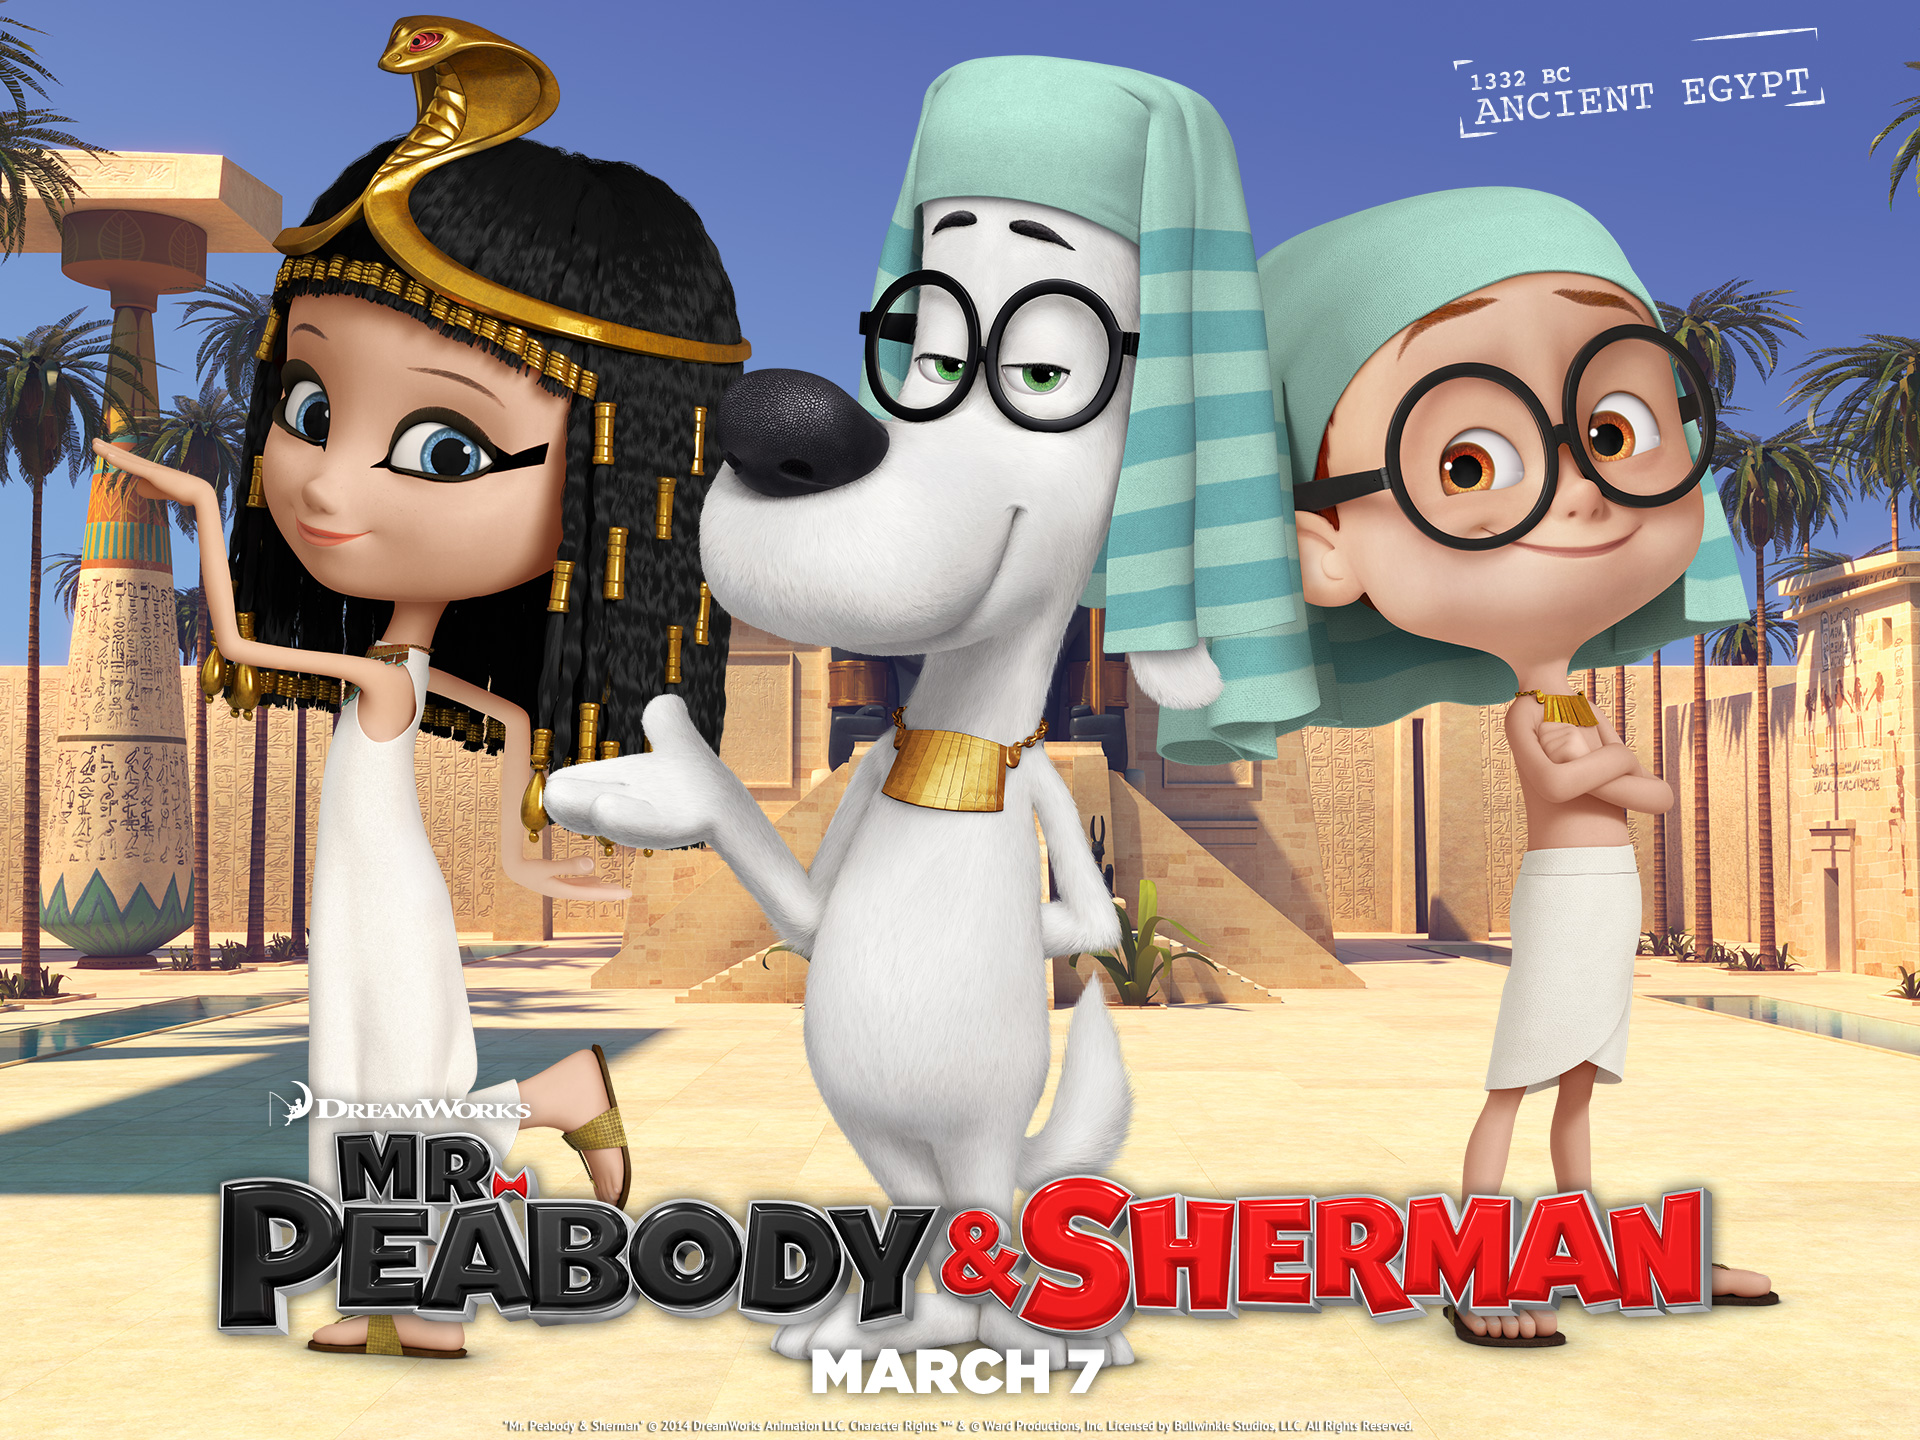 Images of Mr. Peabody & Sherman | 1920x1440